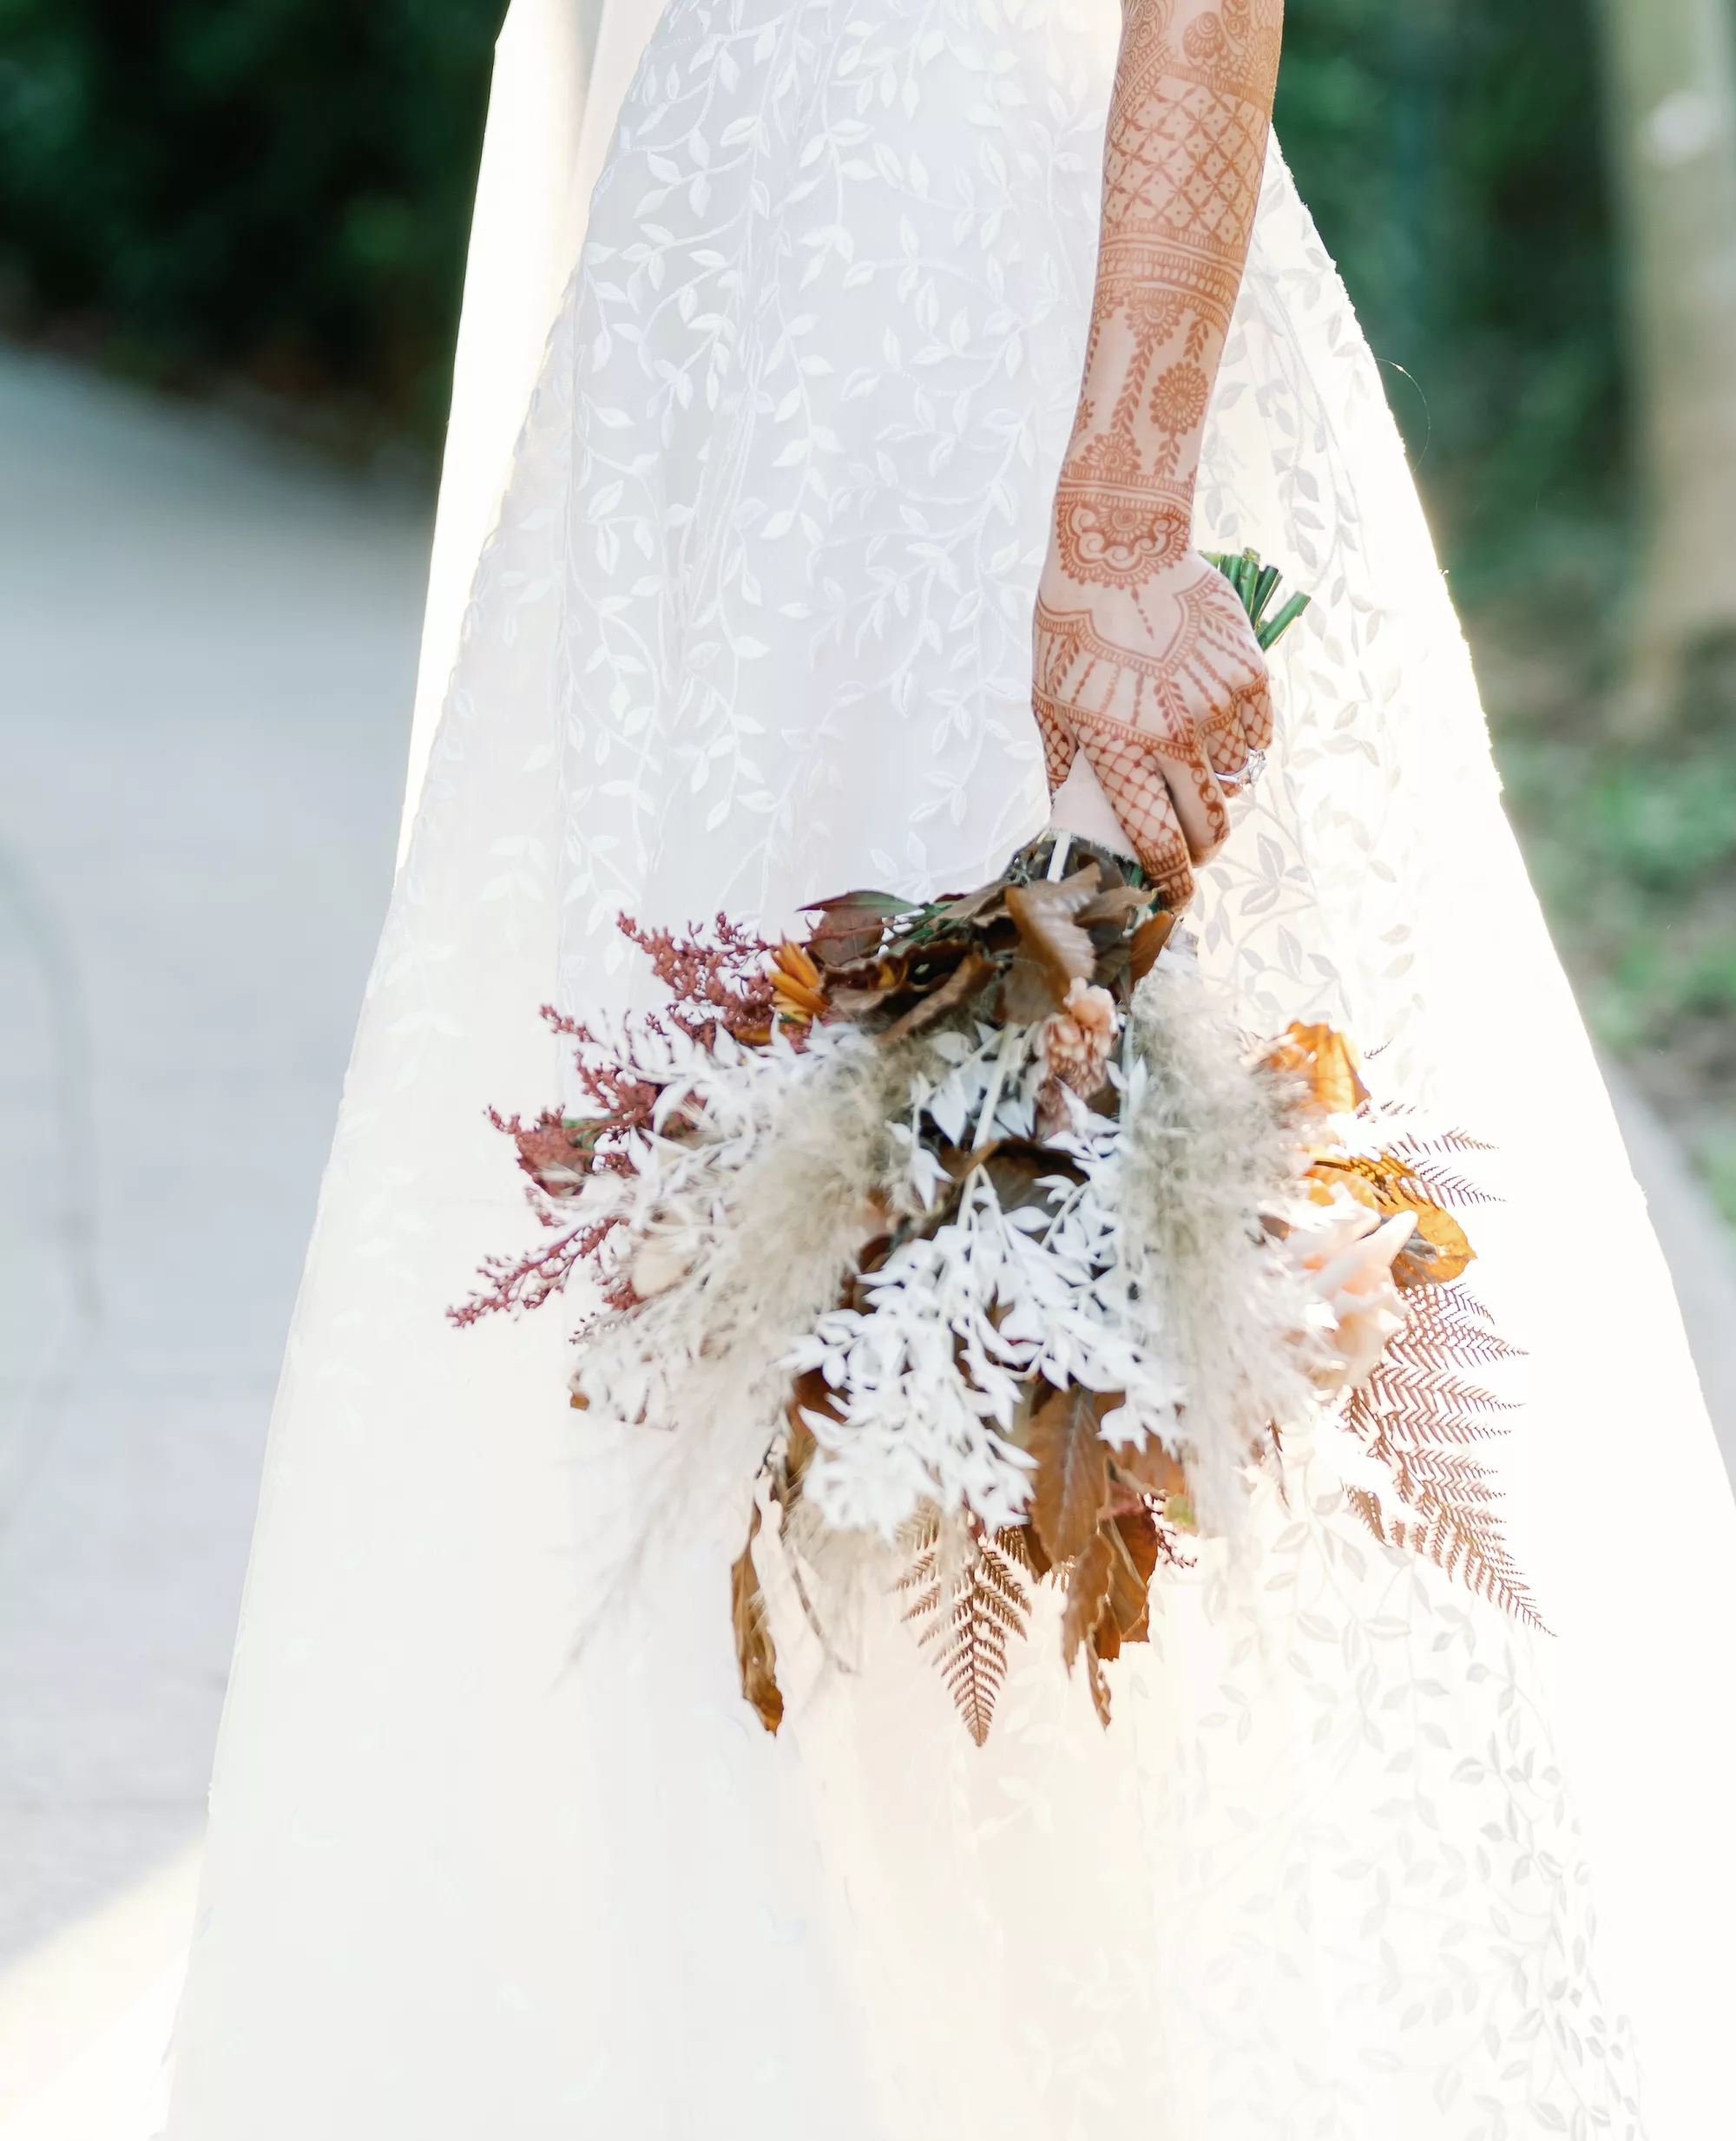 Boho Bridal Wedding Bouquet Ideas with Dried Florals, Pampas Grass, and Ferns